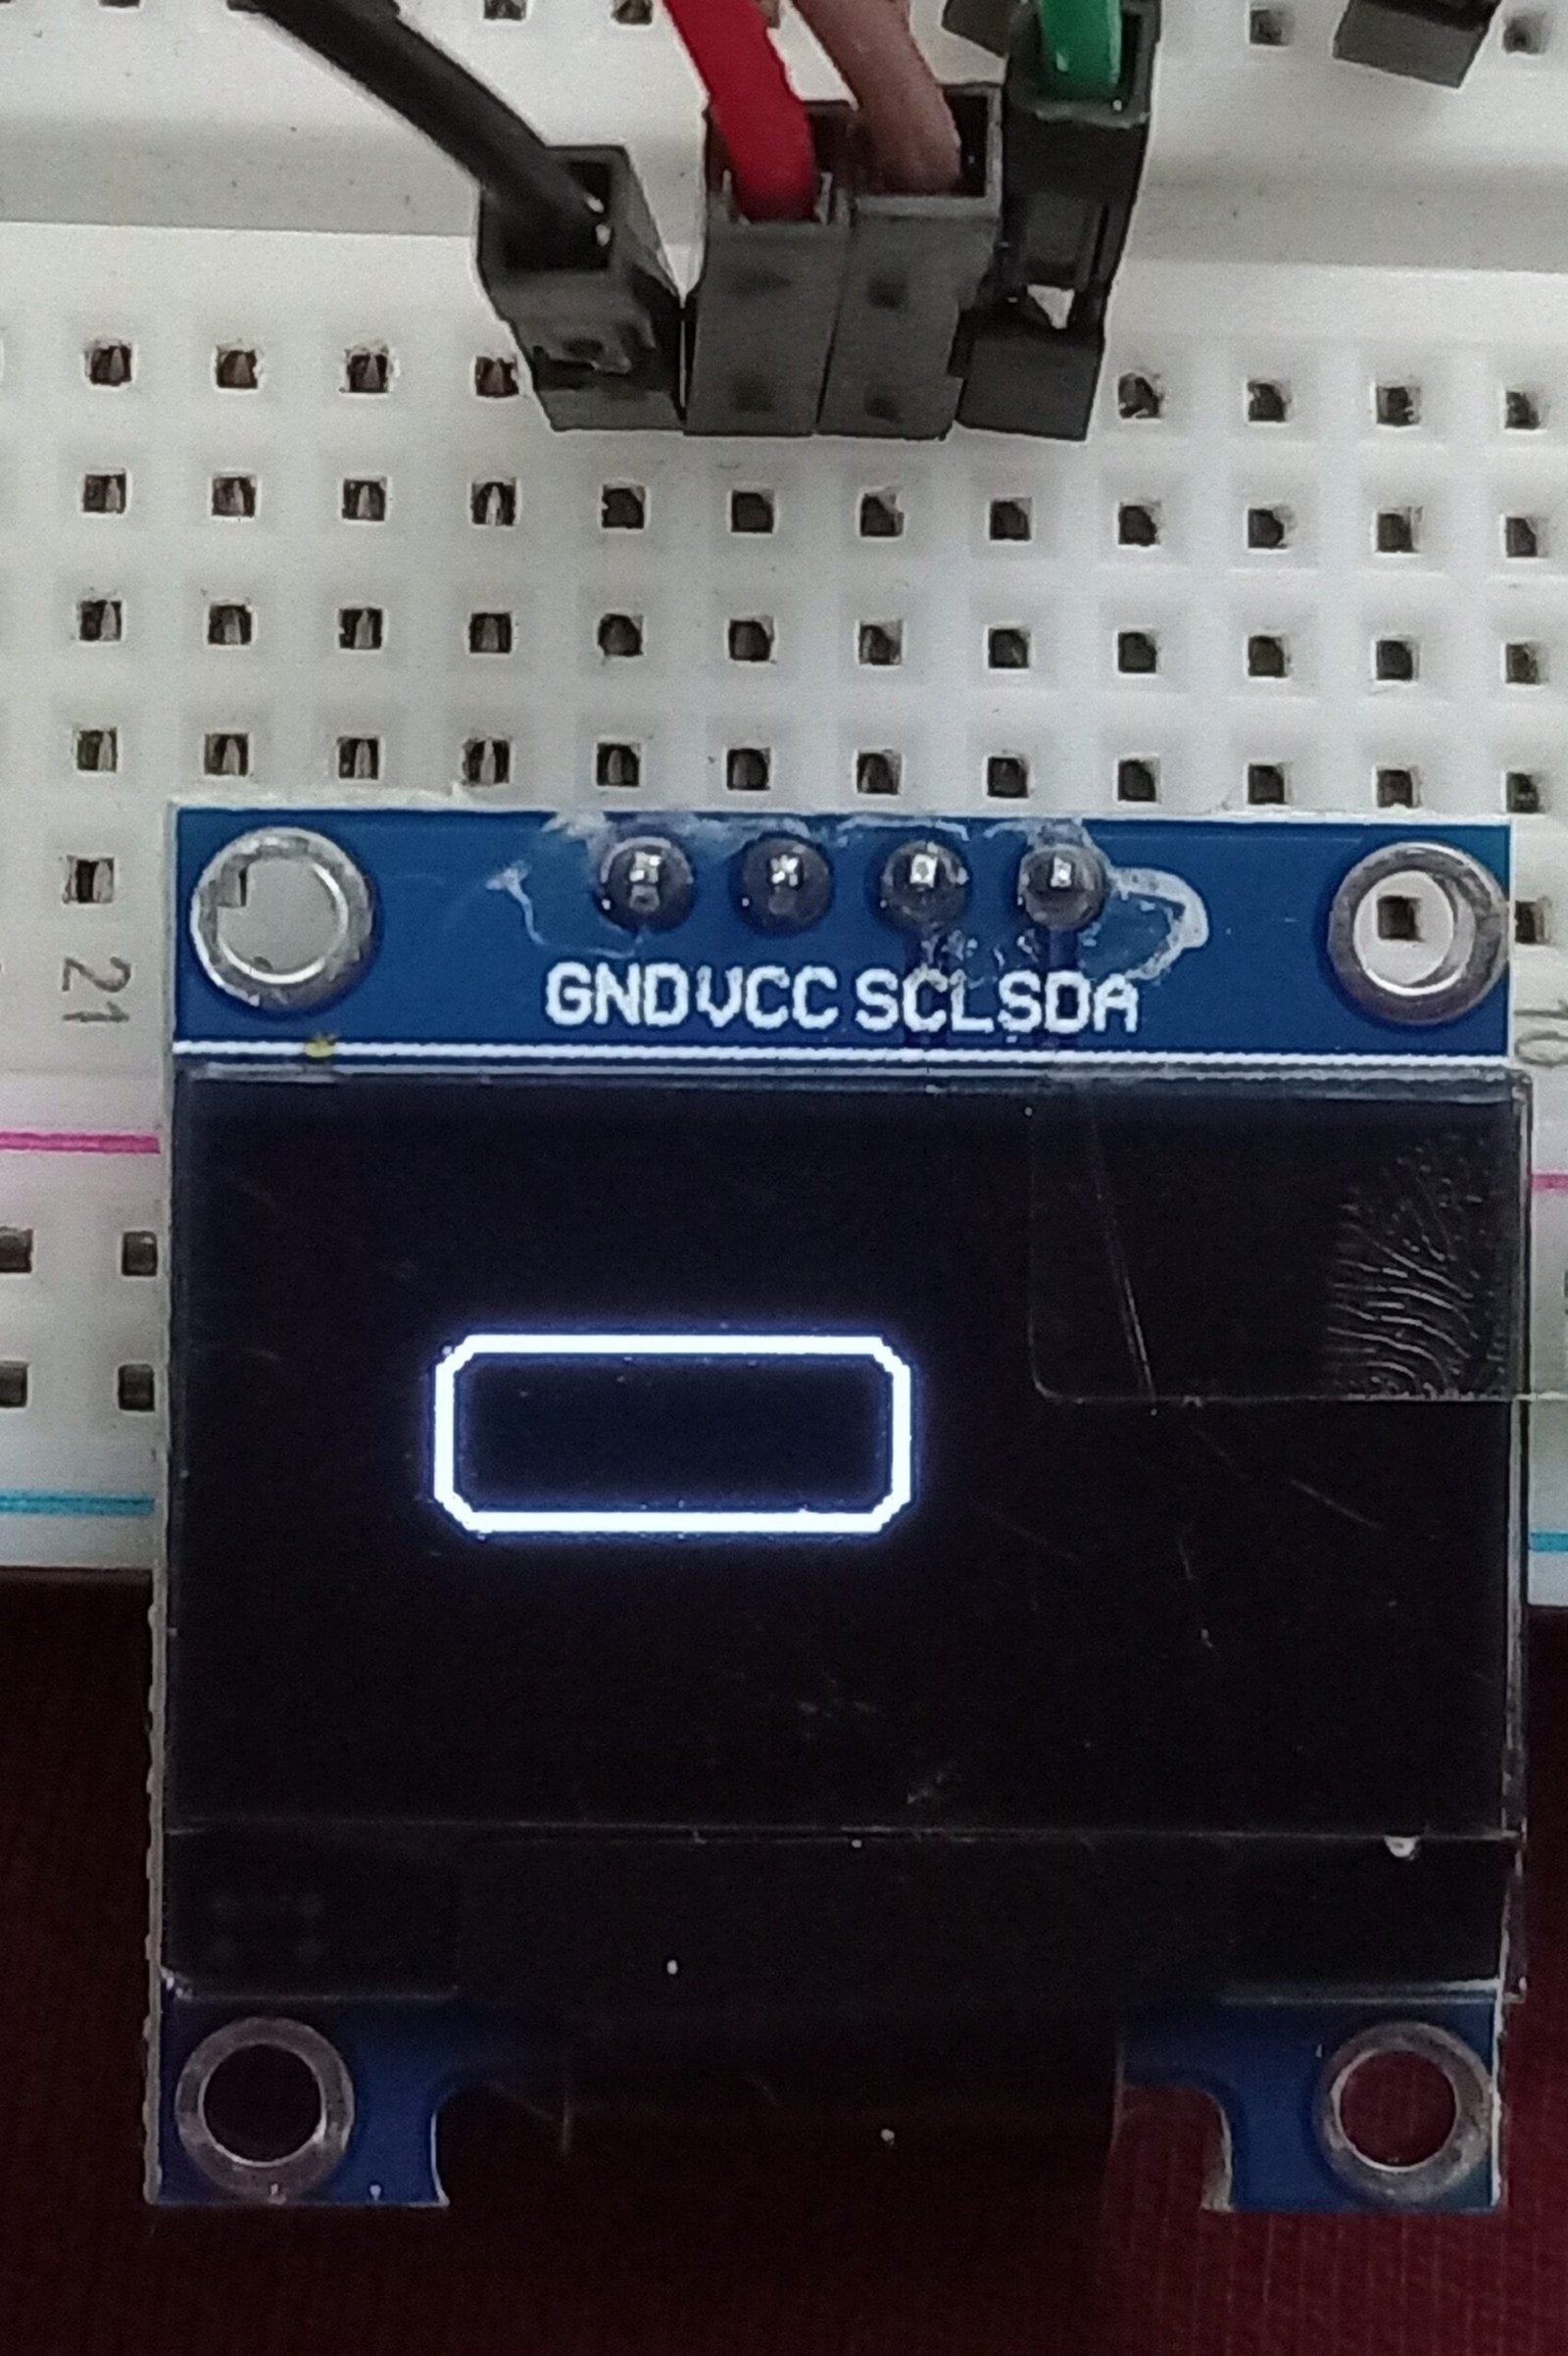 OLED display rounded rectangle